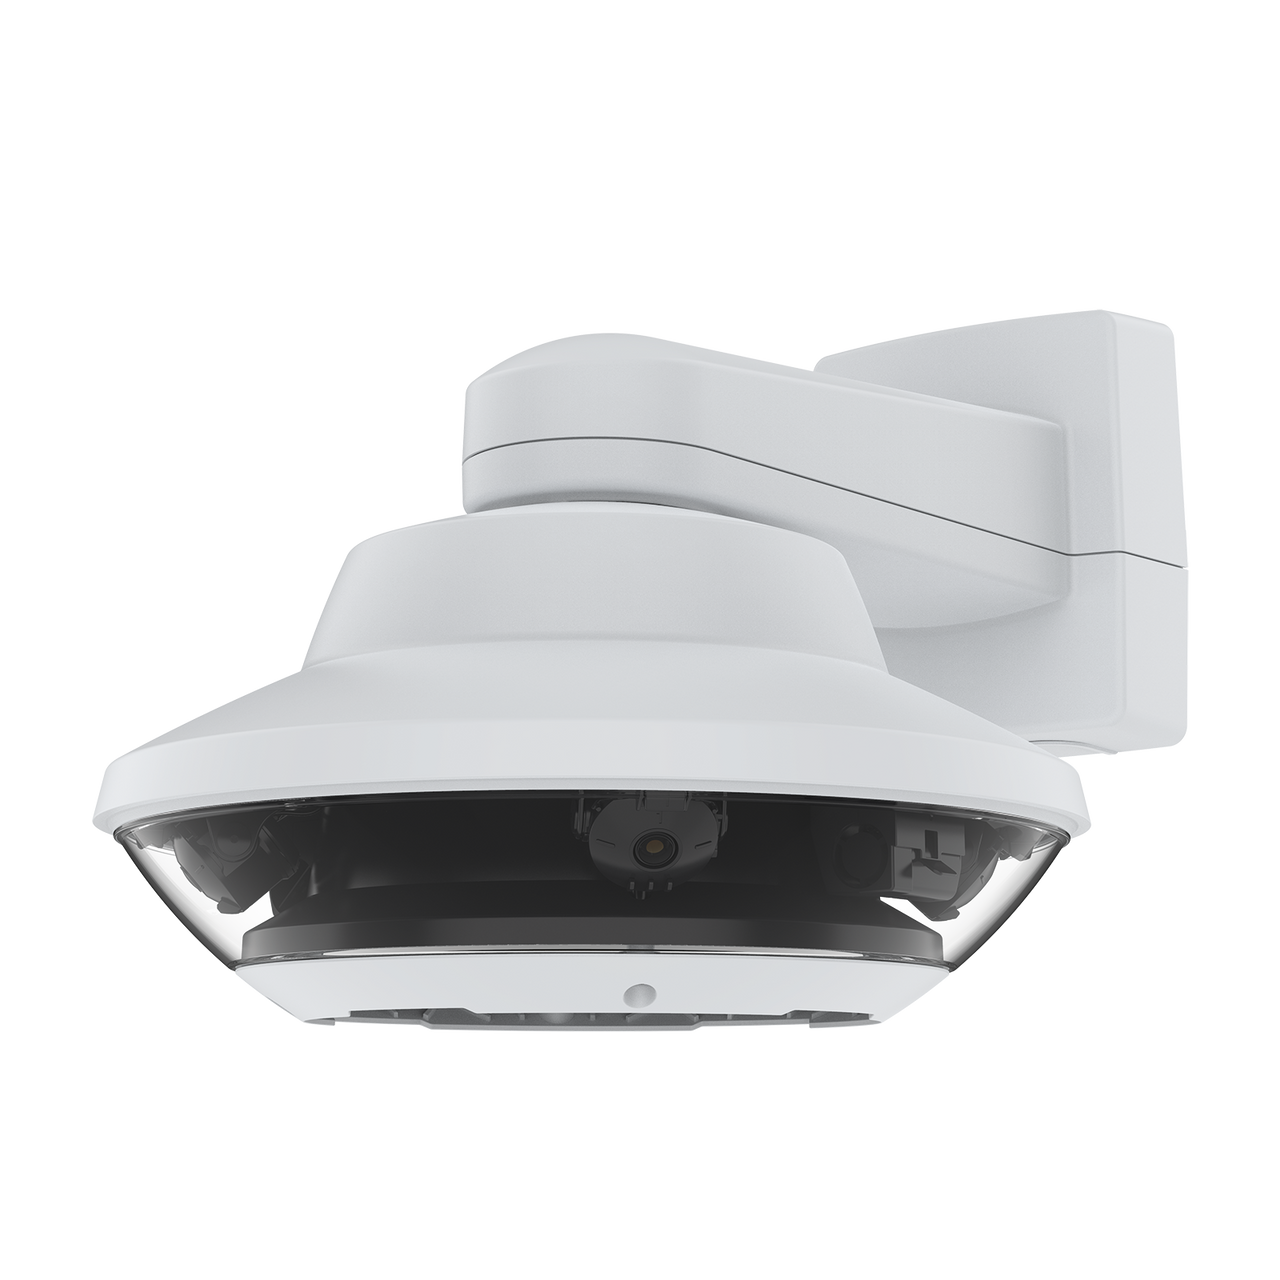 AXIS Q6010-E 60HZ For 360° real-time monitoring and great detail